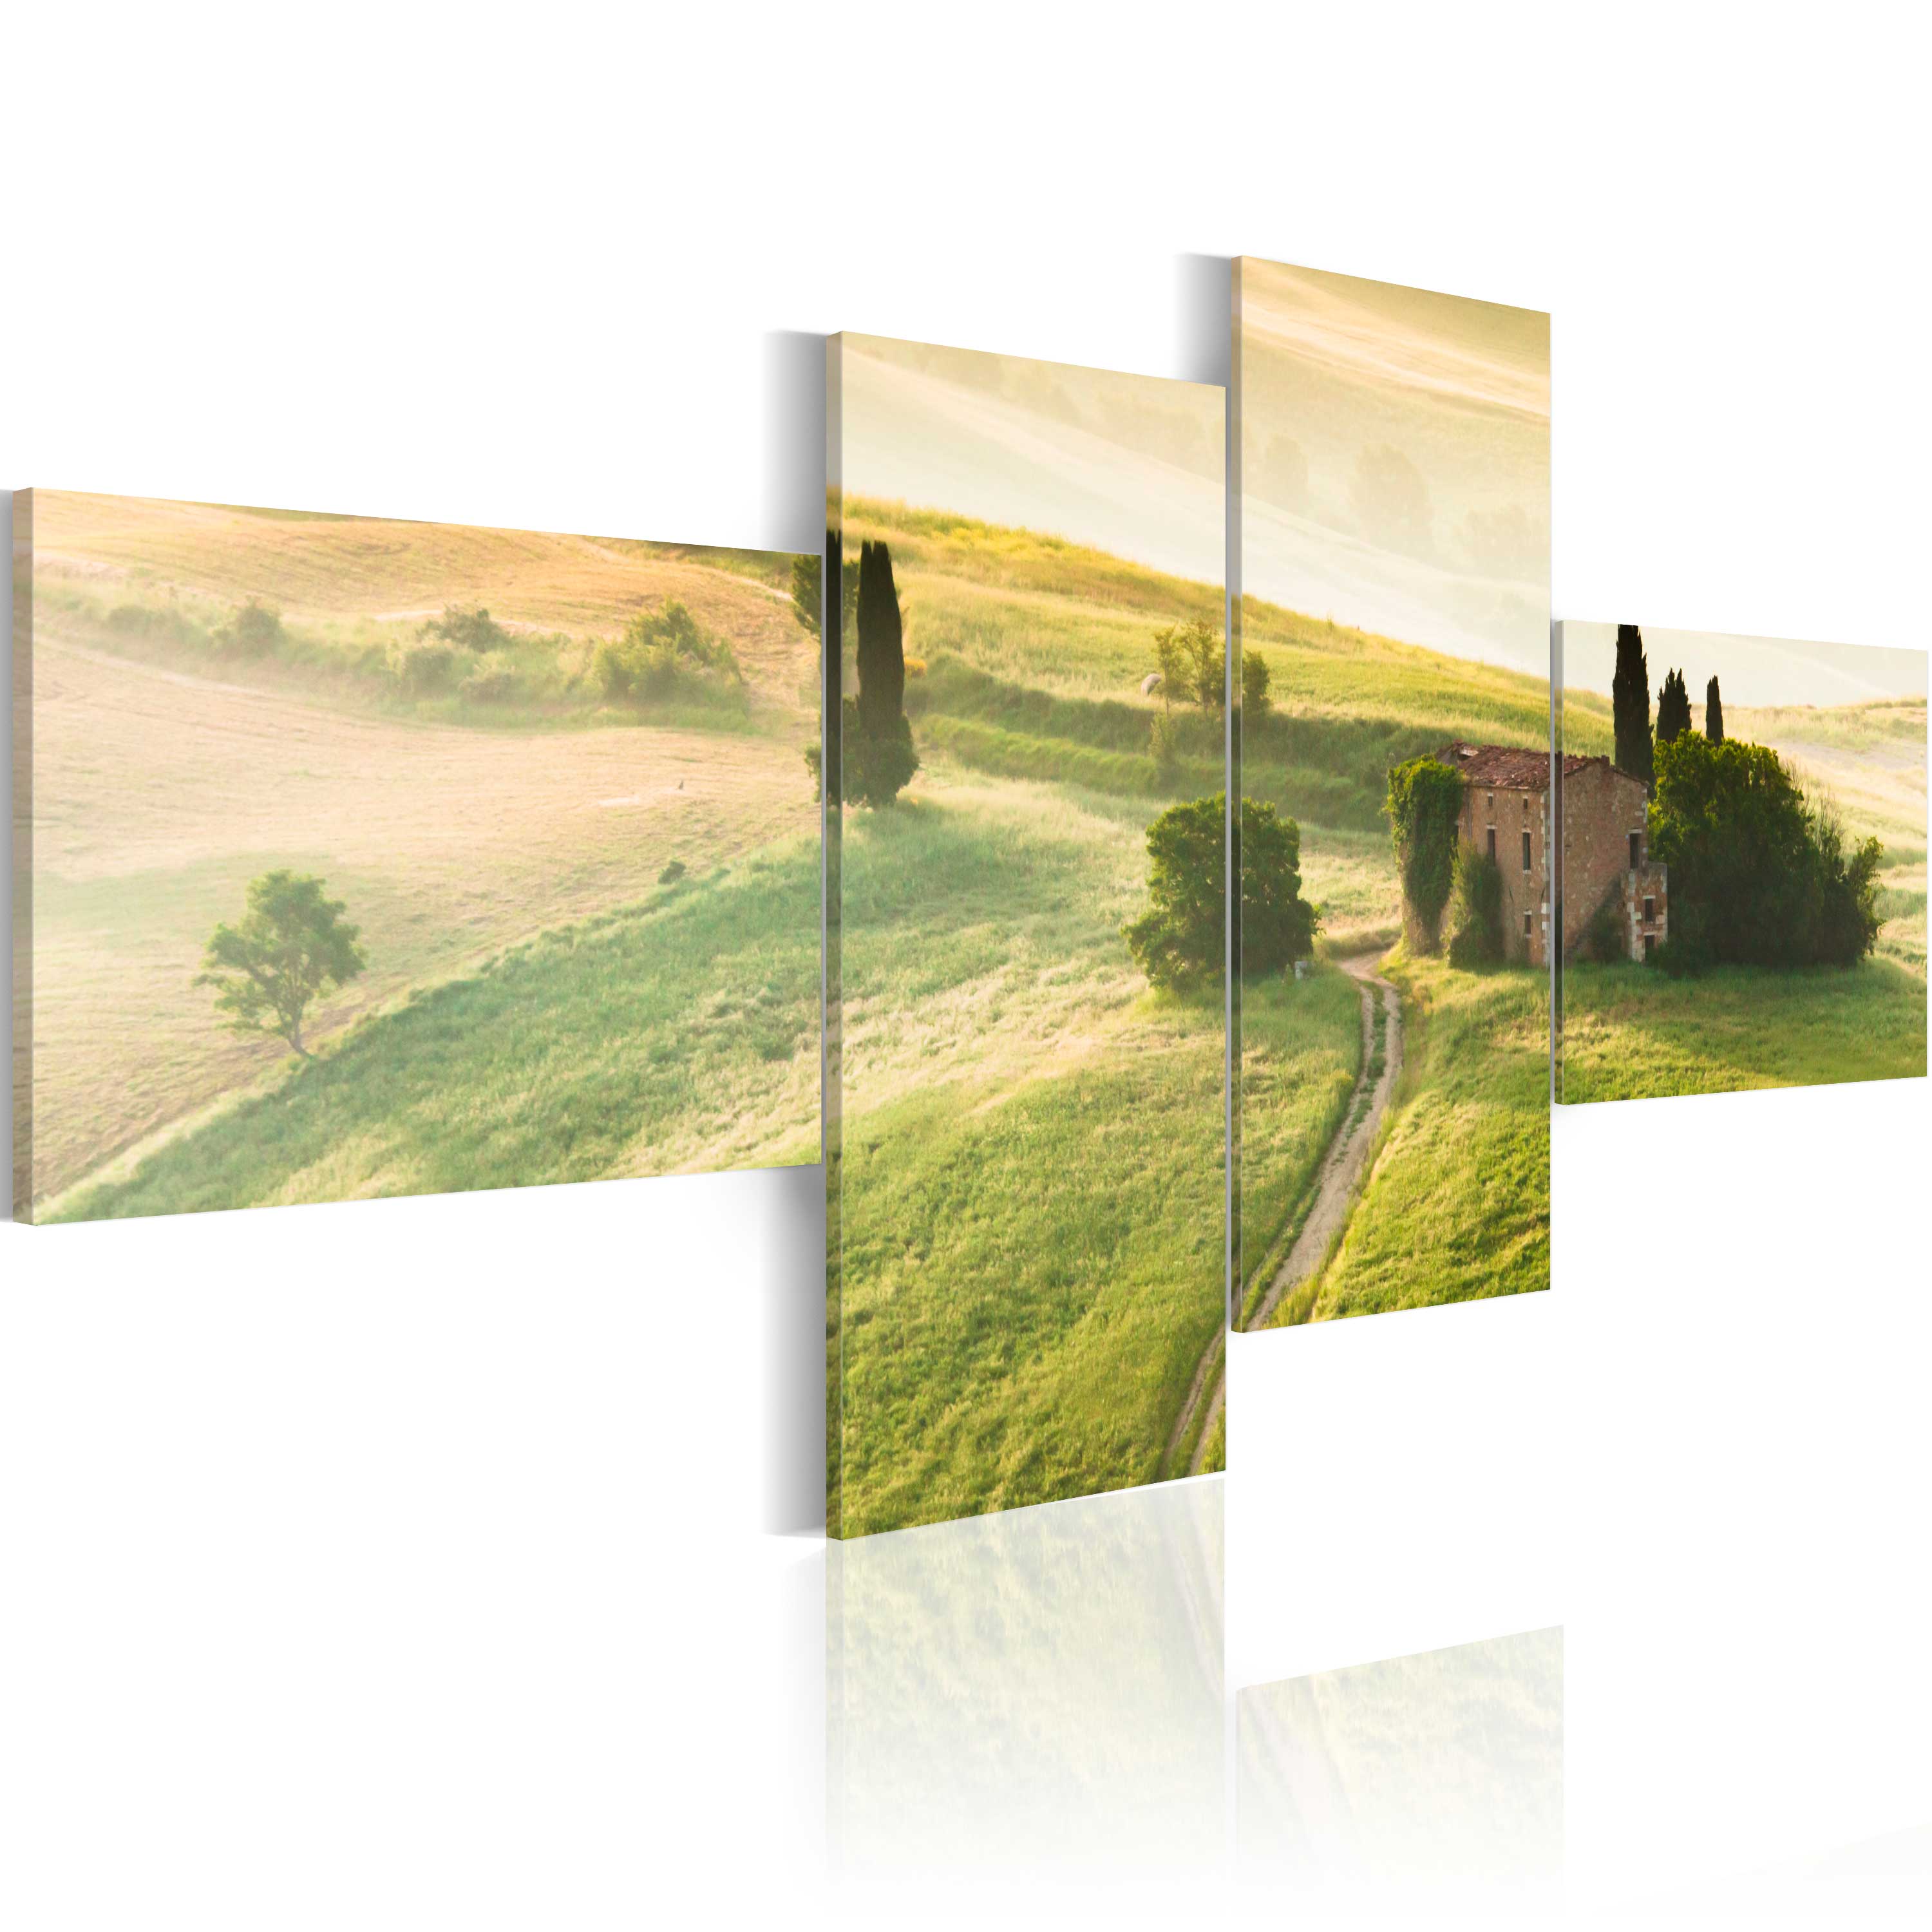 Canvas Print - The tranquillity of Tuscany - 200x90